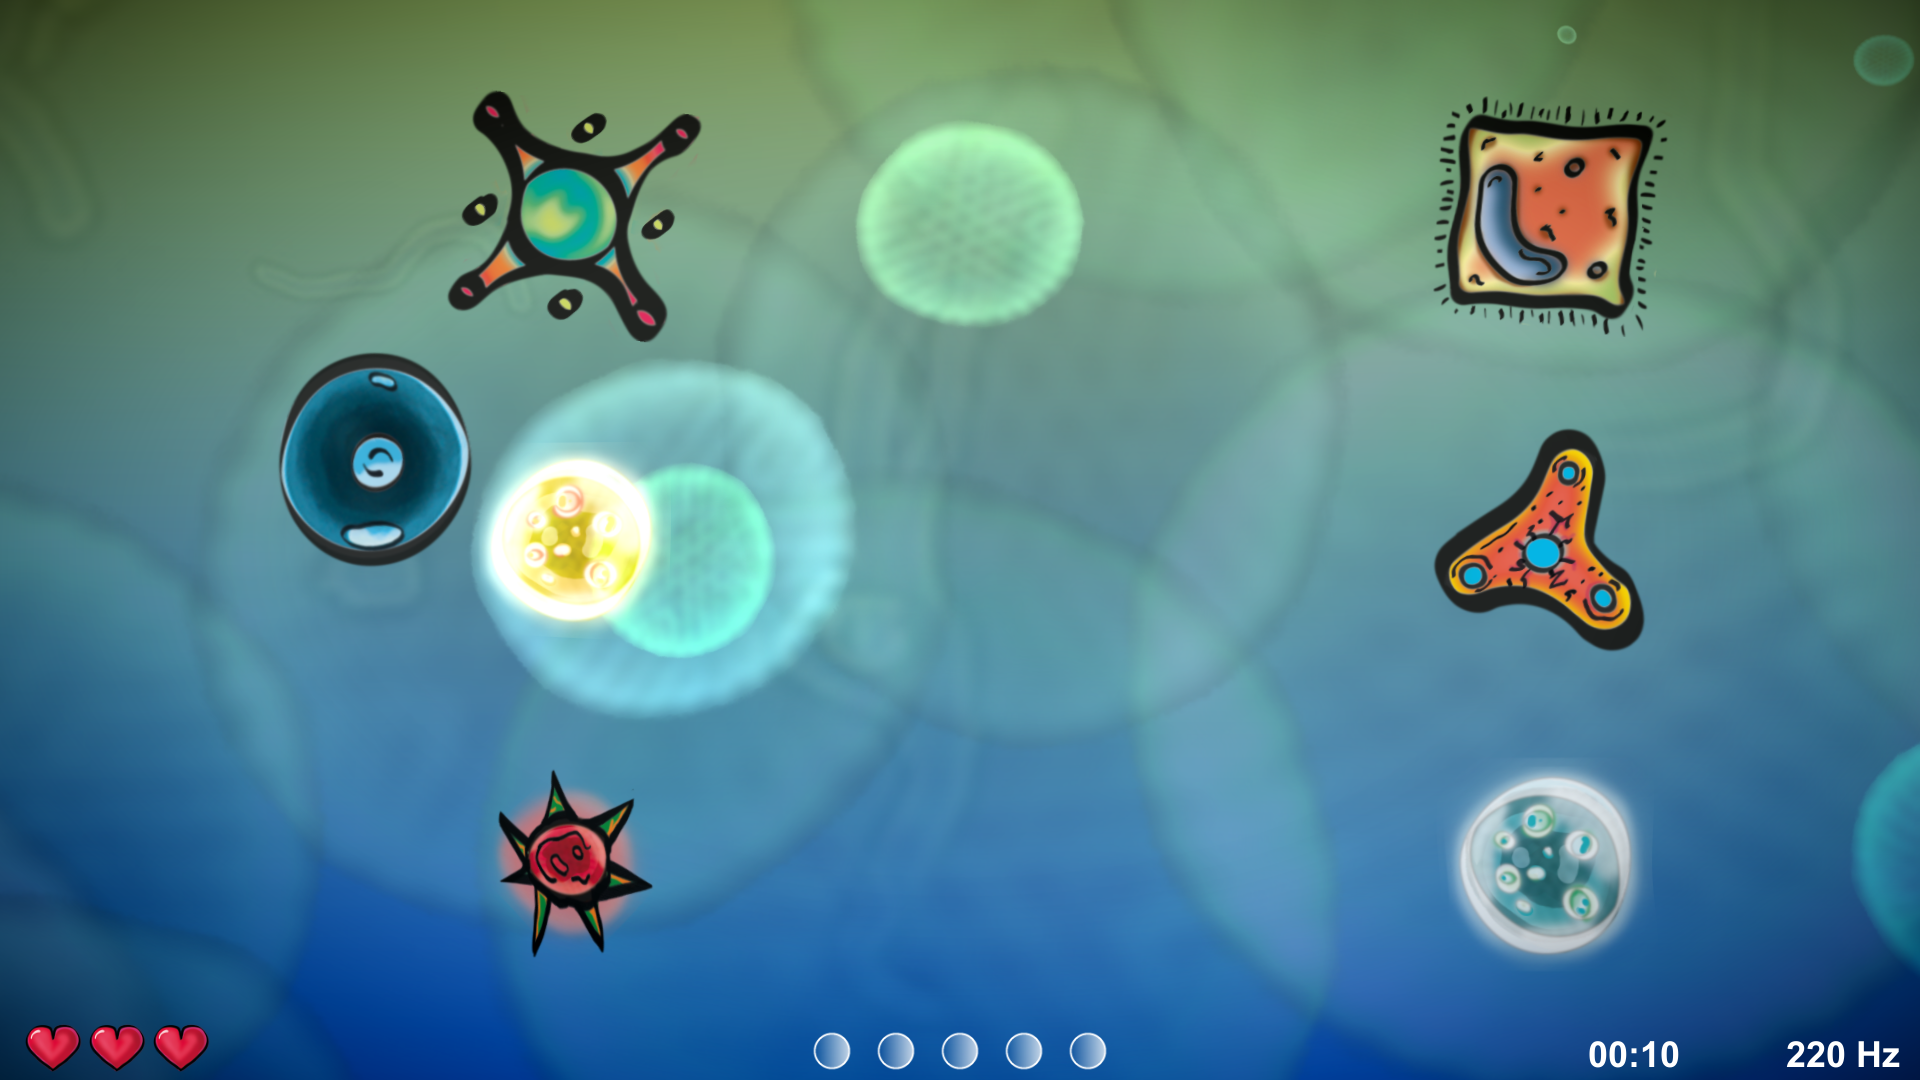 Screenshot of the game 'Amplify'. The controllable character is on the left side. Enemies, obstacles and collectibles (all appearing as abstract, but distinct shapes) float towards it from the right. At the bottom of the screen are several ui elements: the health of the player, collected orbs, the elapsed time and the last emitted frequency. The background shows microscopic appearing objects in front of a vertical color gradient.